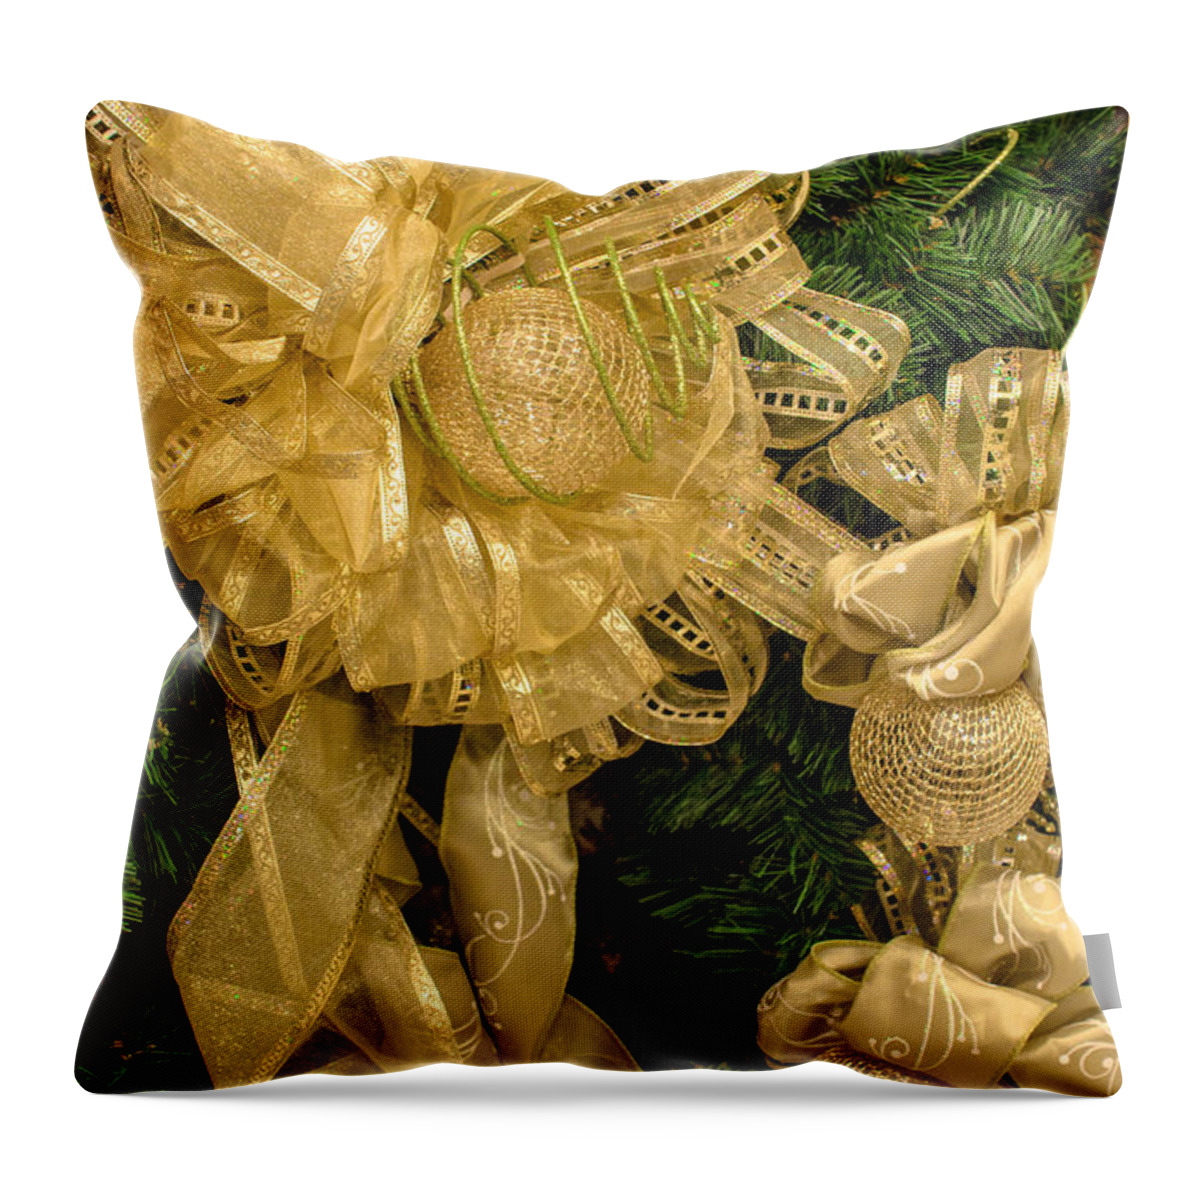 Gold Christmas Wreath Throw Pillow featuring the photograph Gold Christmas Wreath by Imagery by Charly